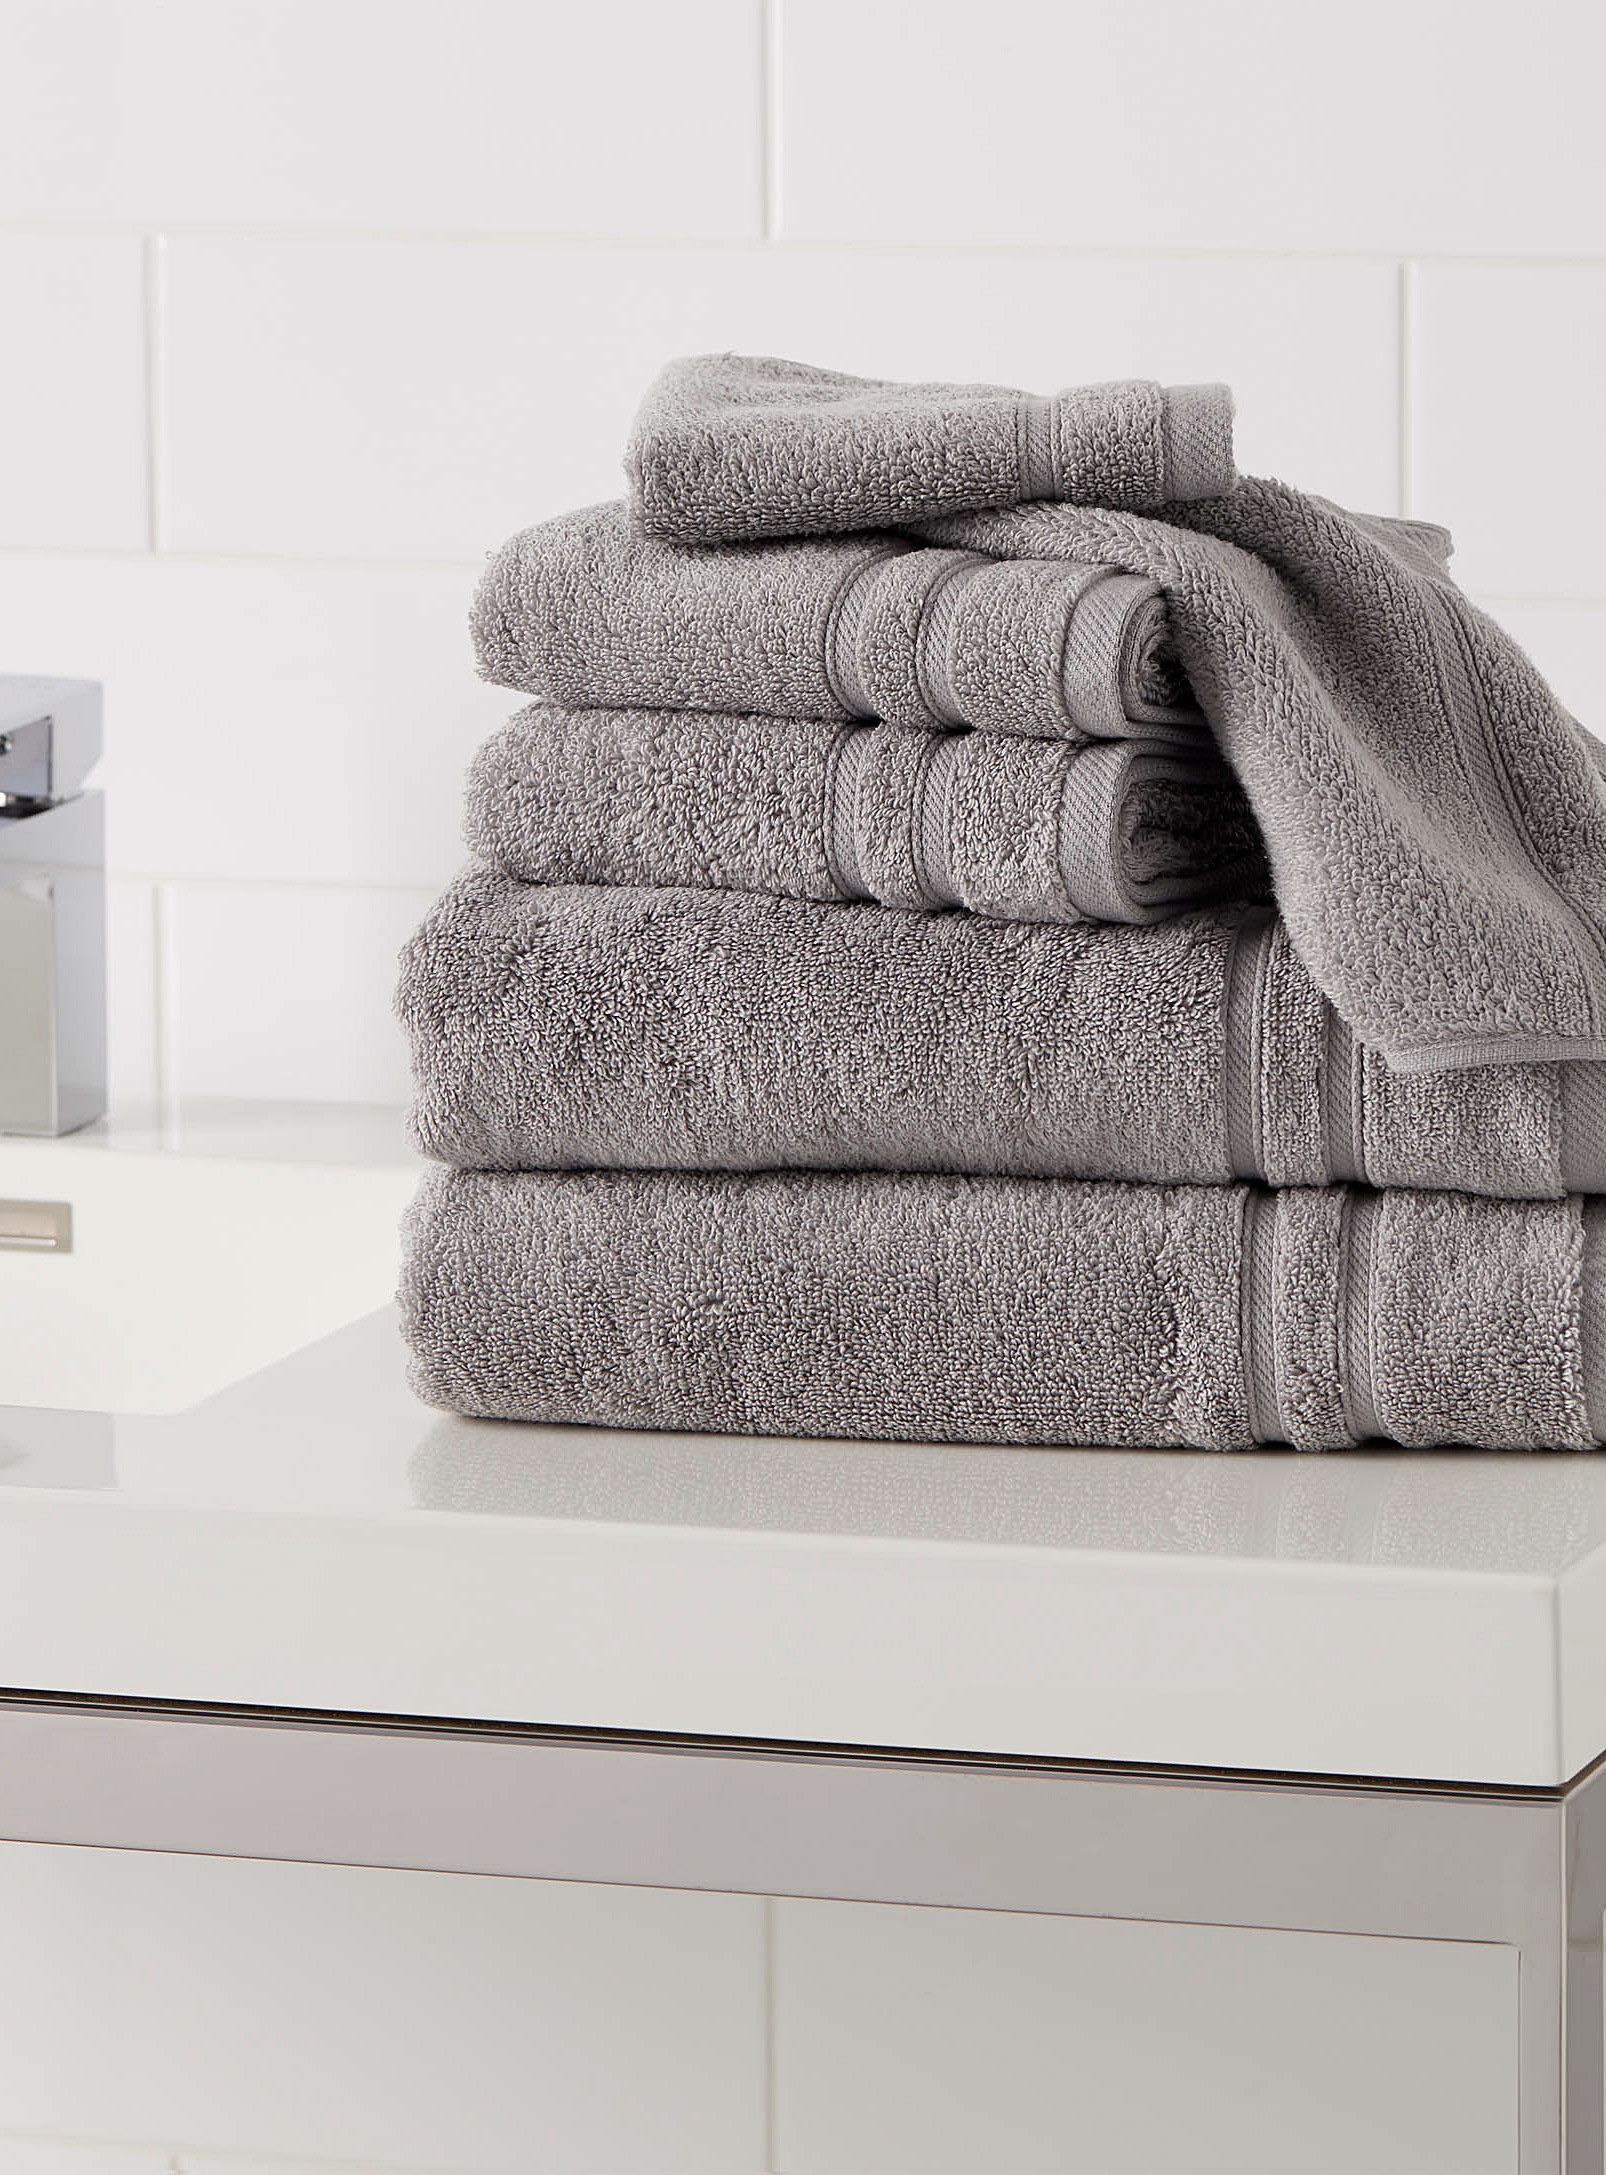 A set of folded towels sitting on a counter in a bathroom